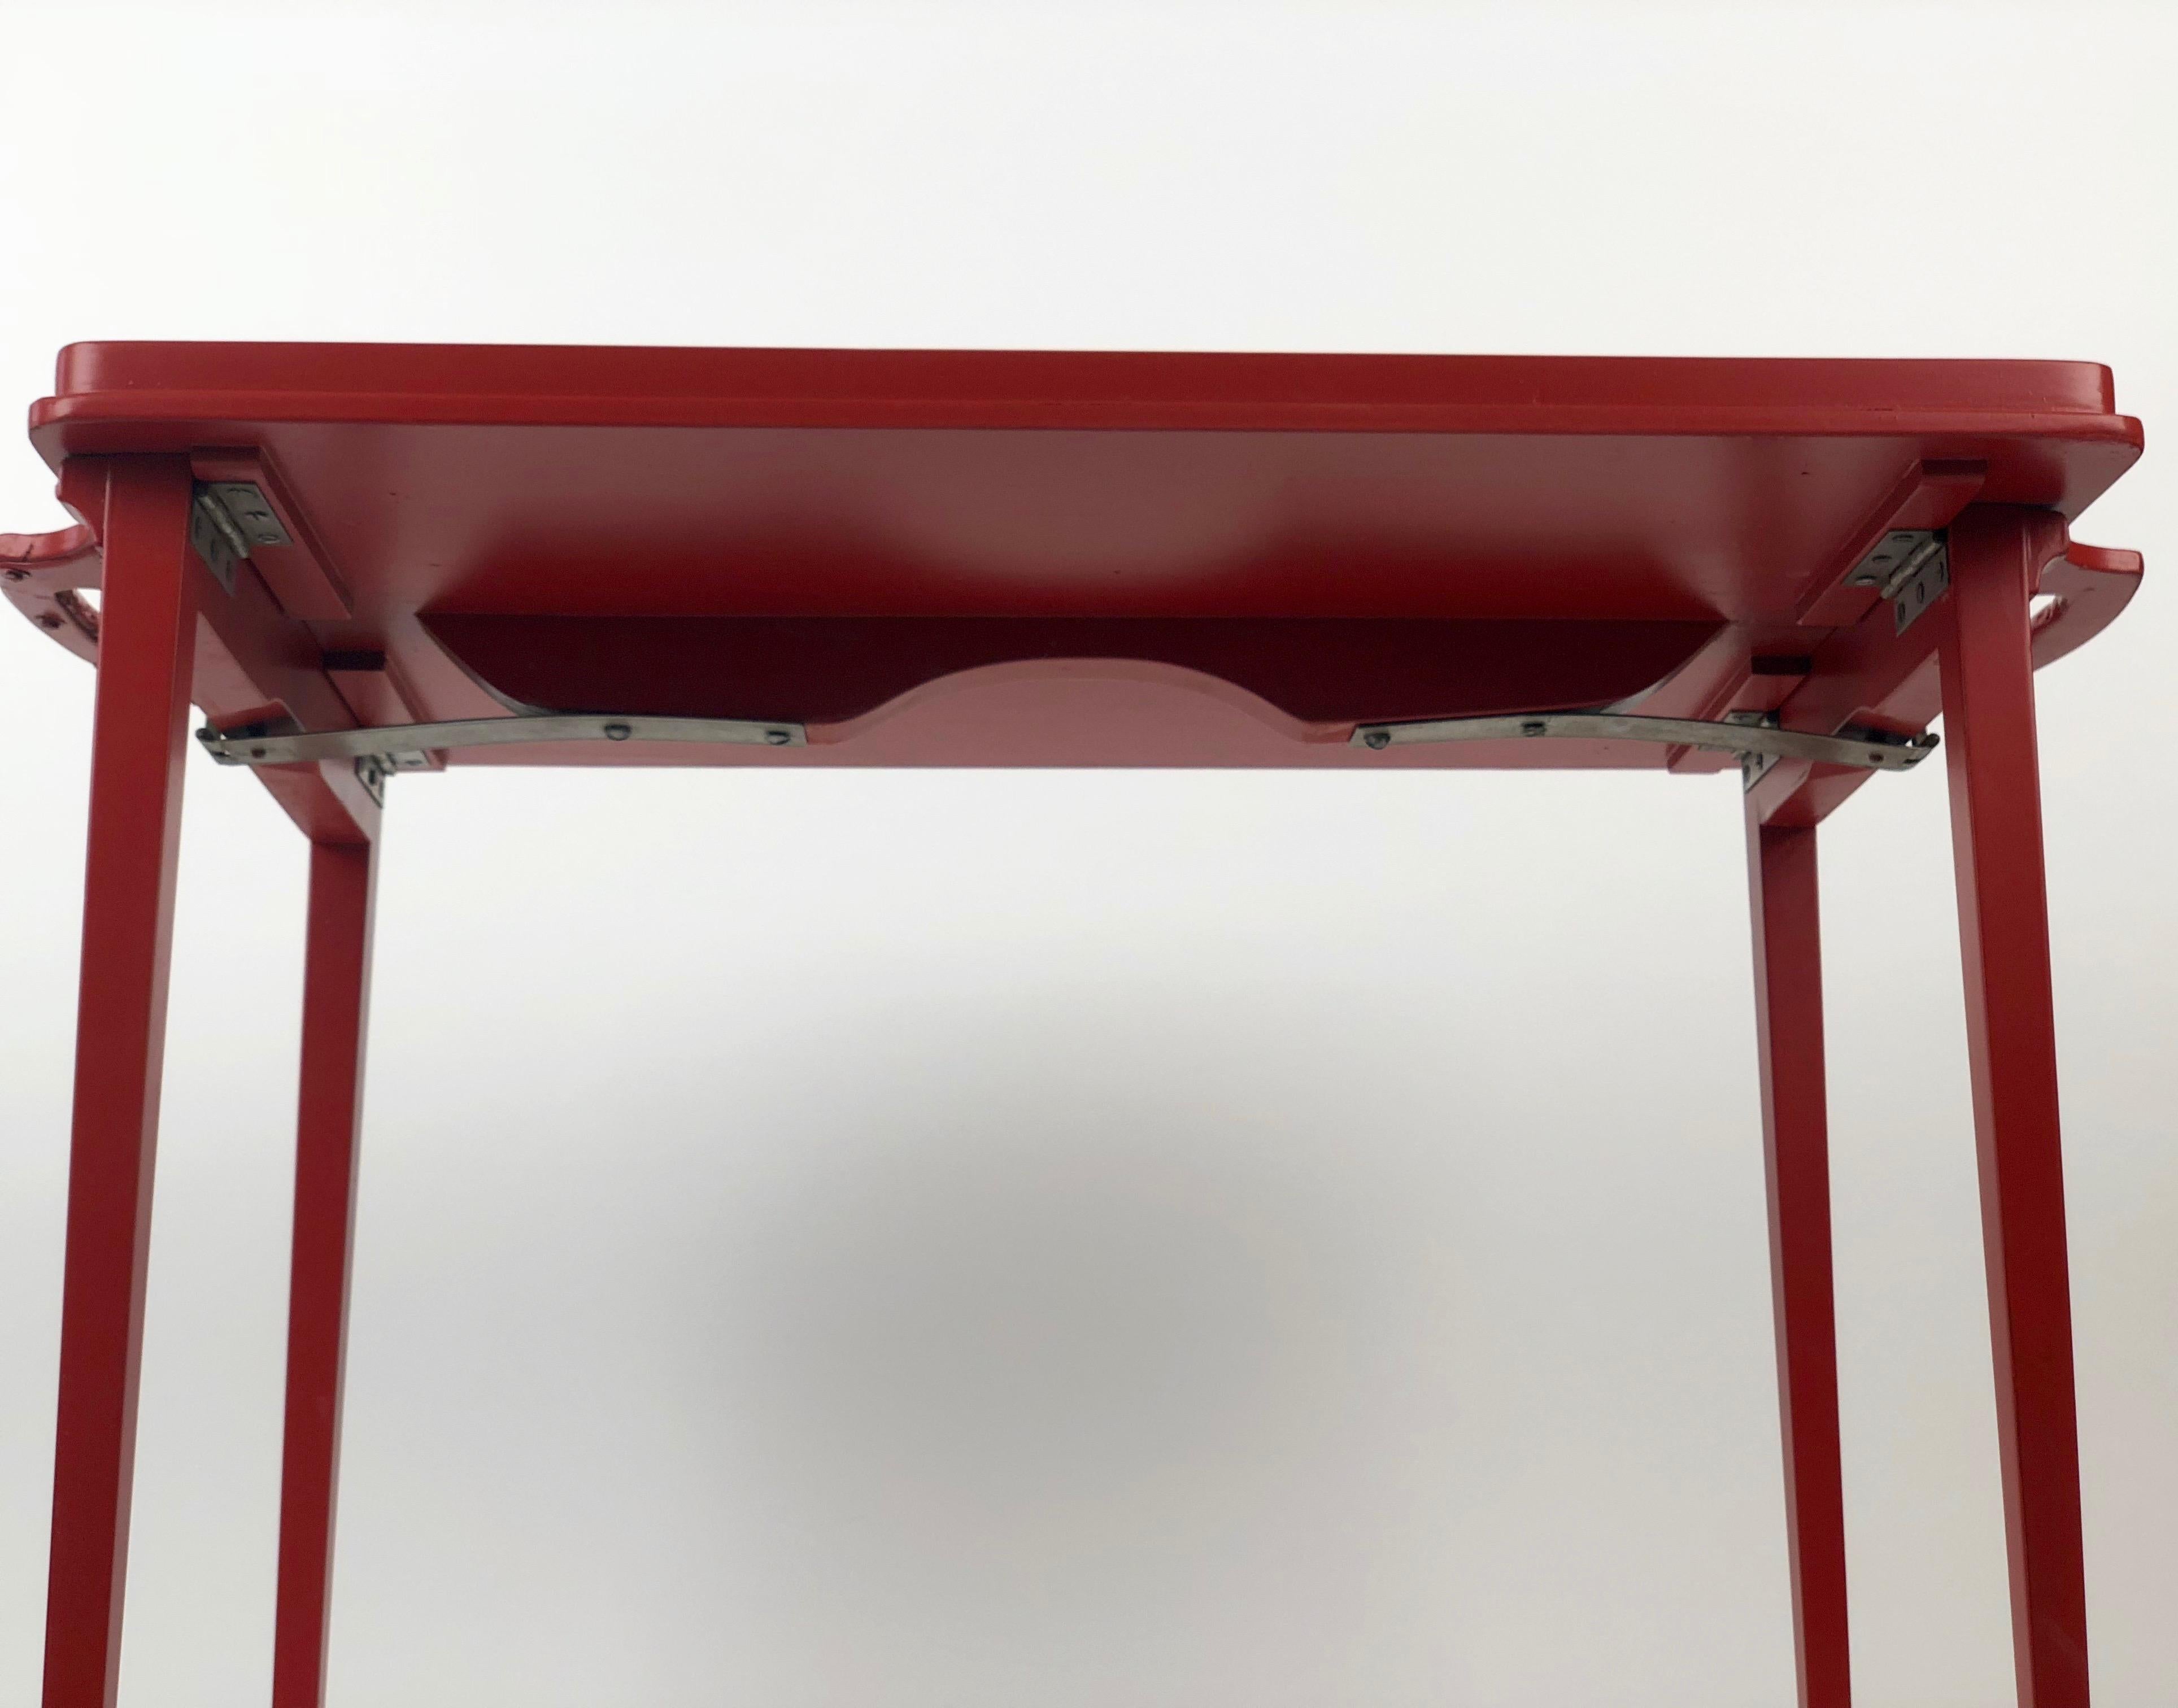 A folding, wooden tray table in burnt orange colour, from the 1930's. The tray uses a simple mechanical mechanism composed of a 
Leaf spring and pin lock. By just pushing the thumb levers it is easy to release the legs and convert the tray to a